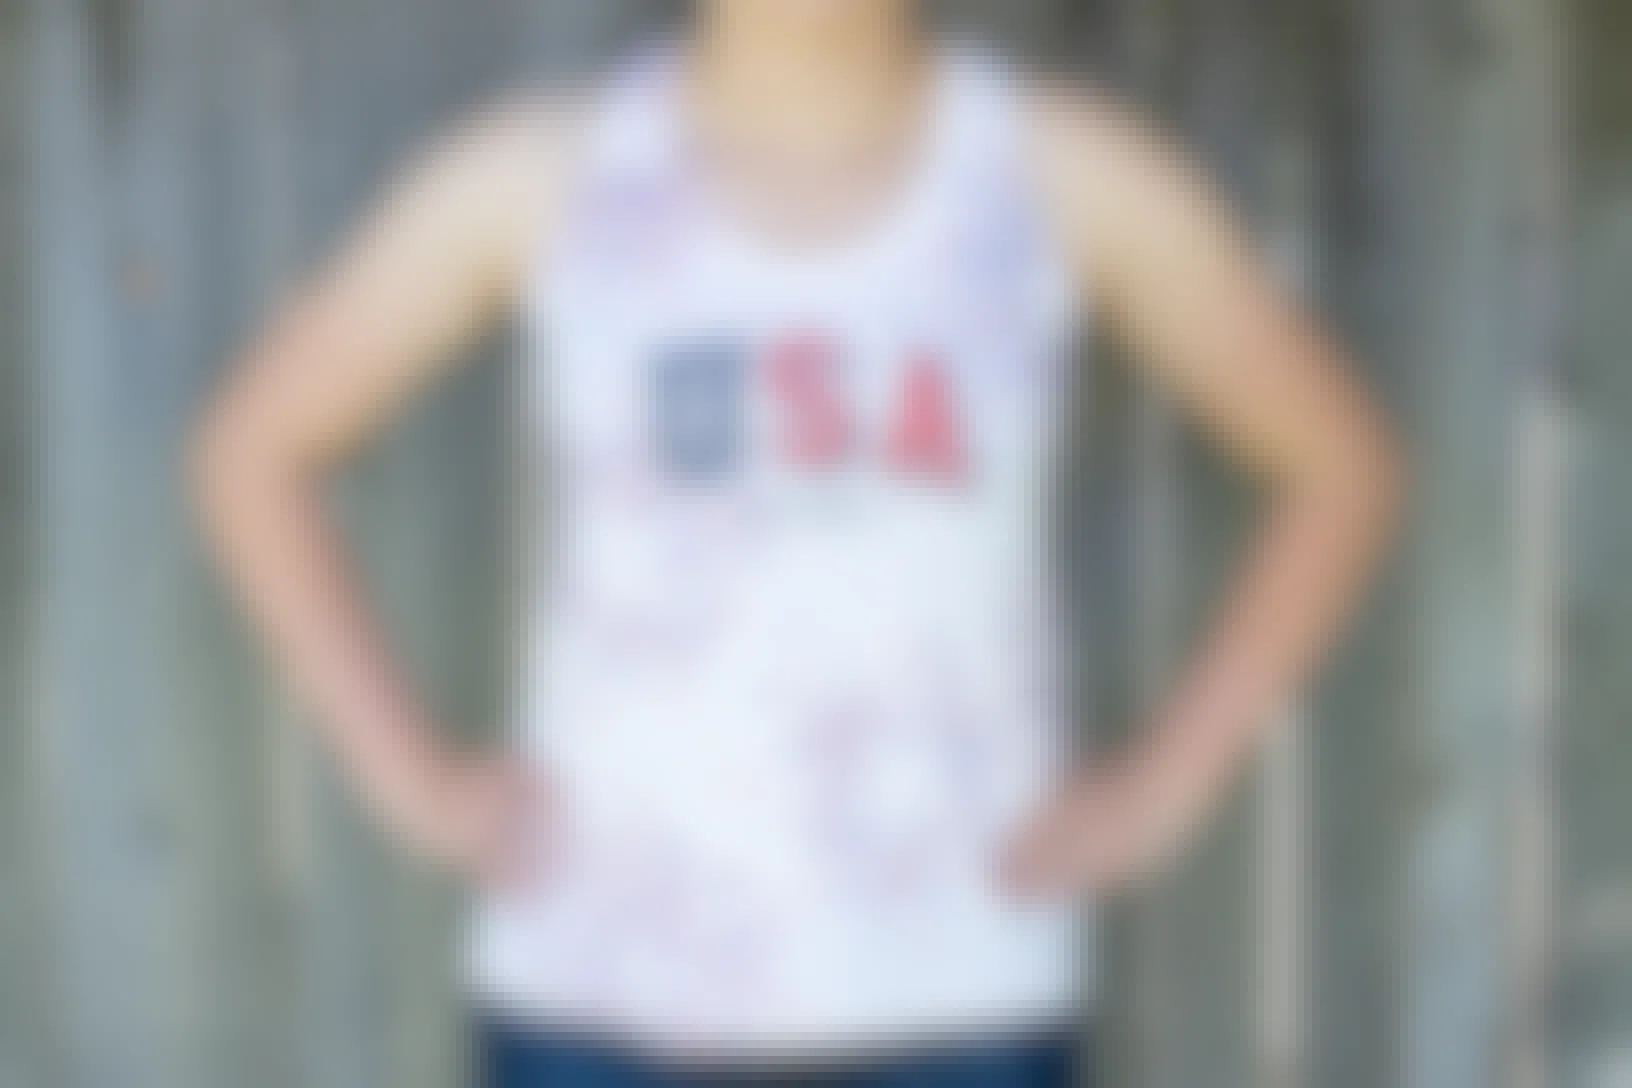 A person wearing a white Old Navy USA tank top with stars stenciled on in red and blue.